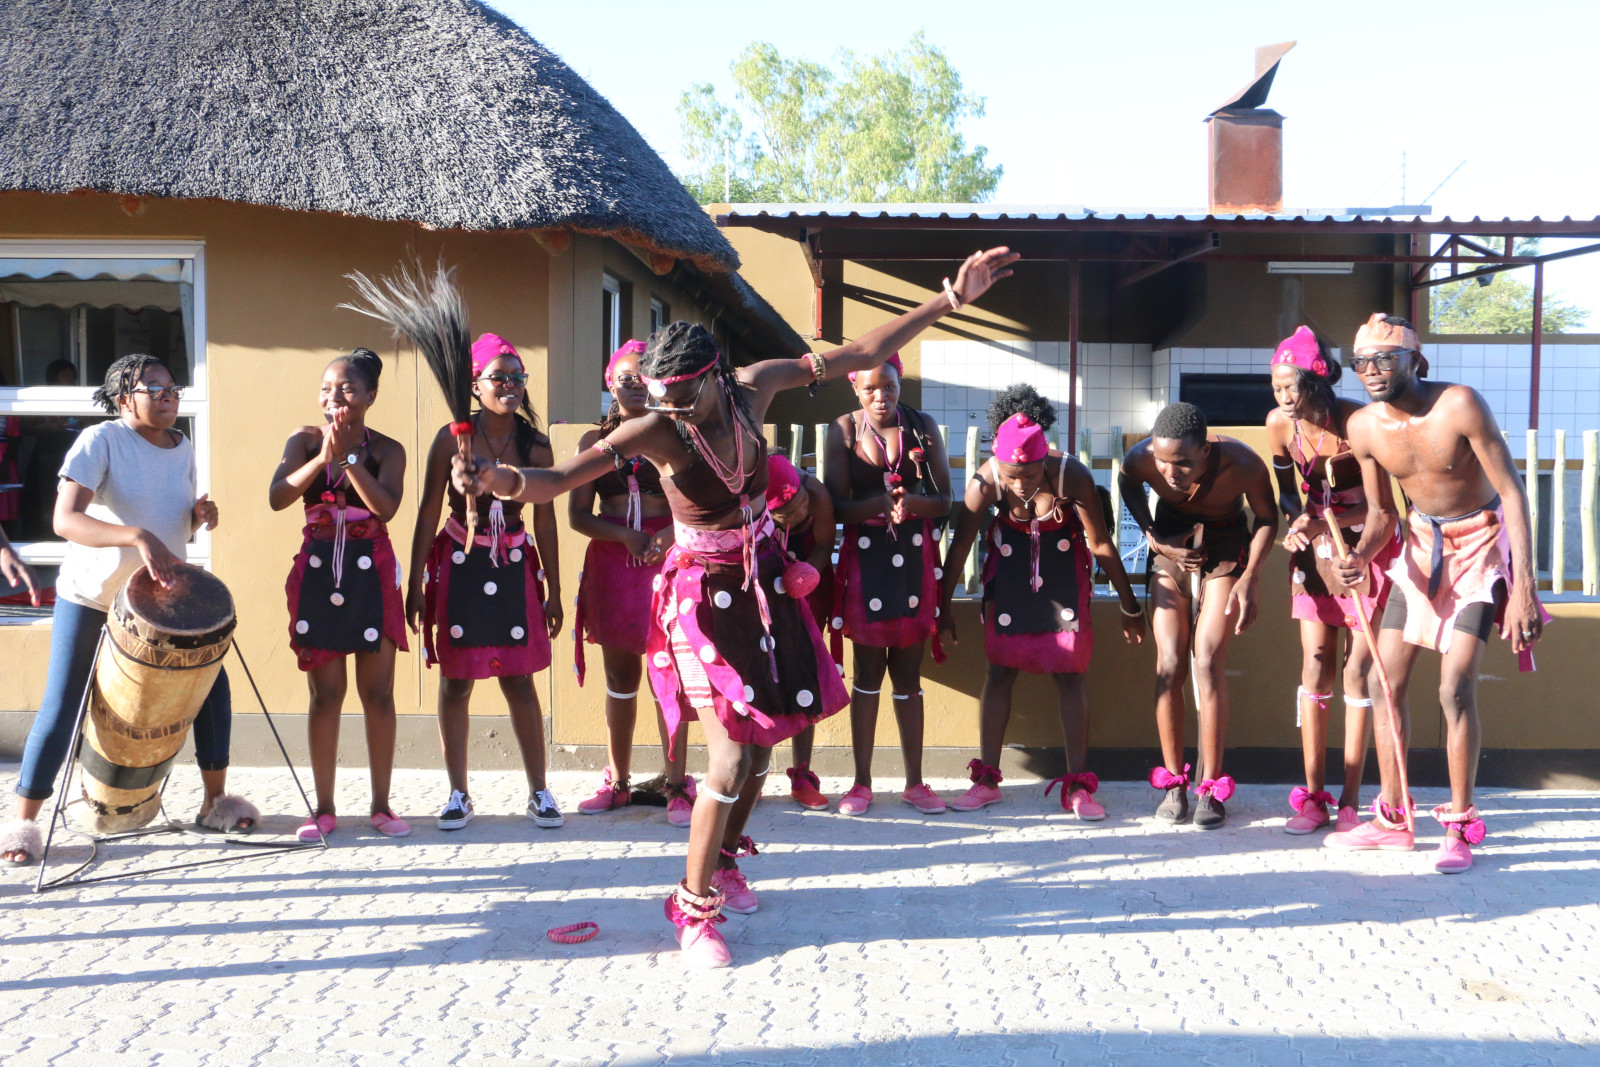 Dancers from northern Namibia performing traditional dances in national costumes.